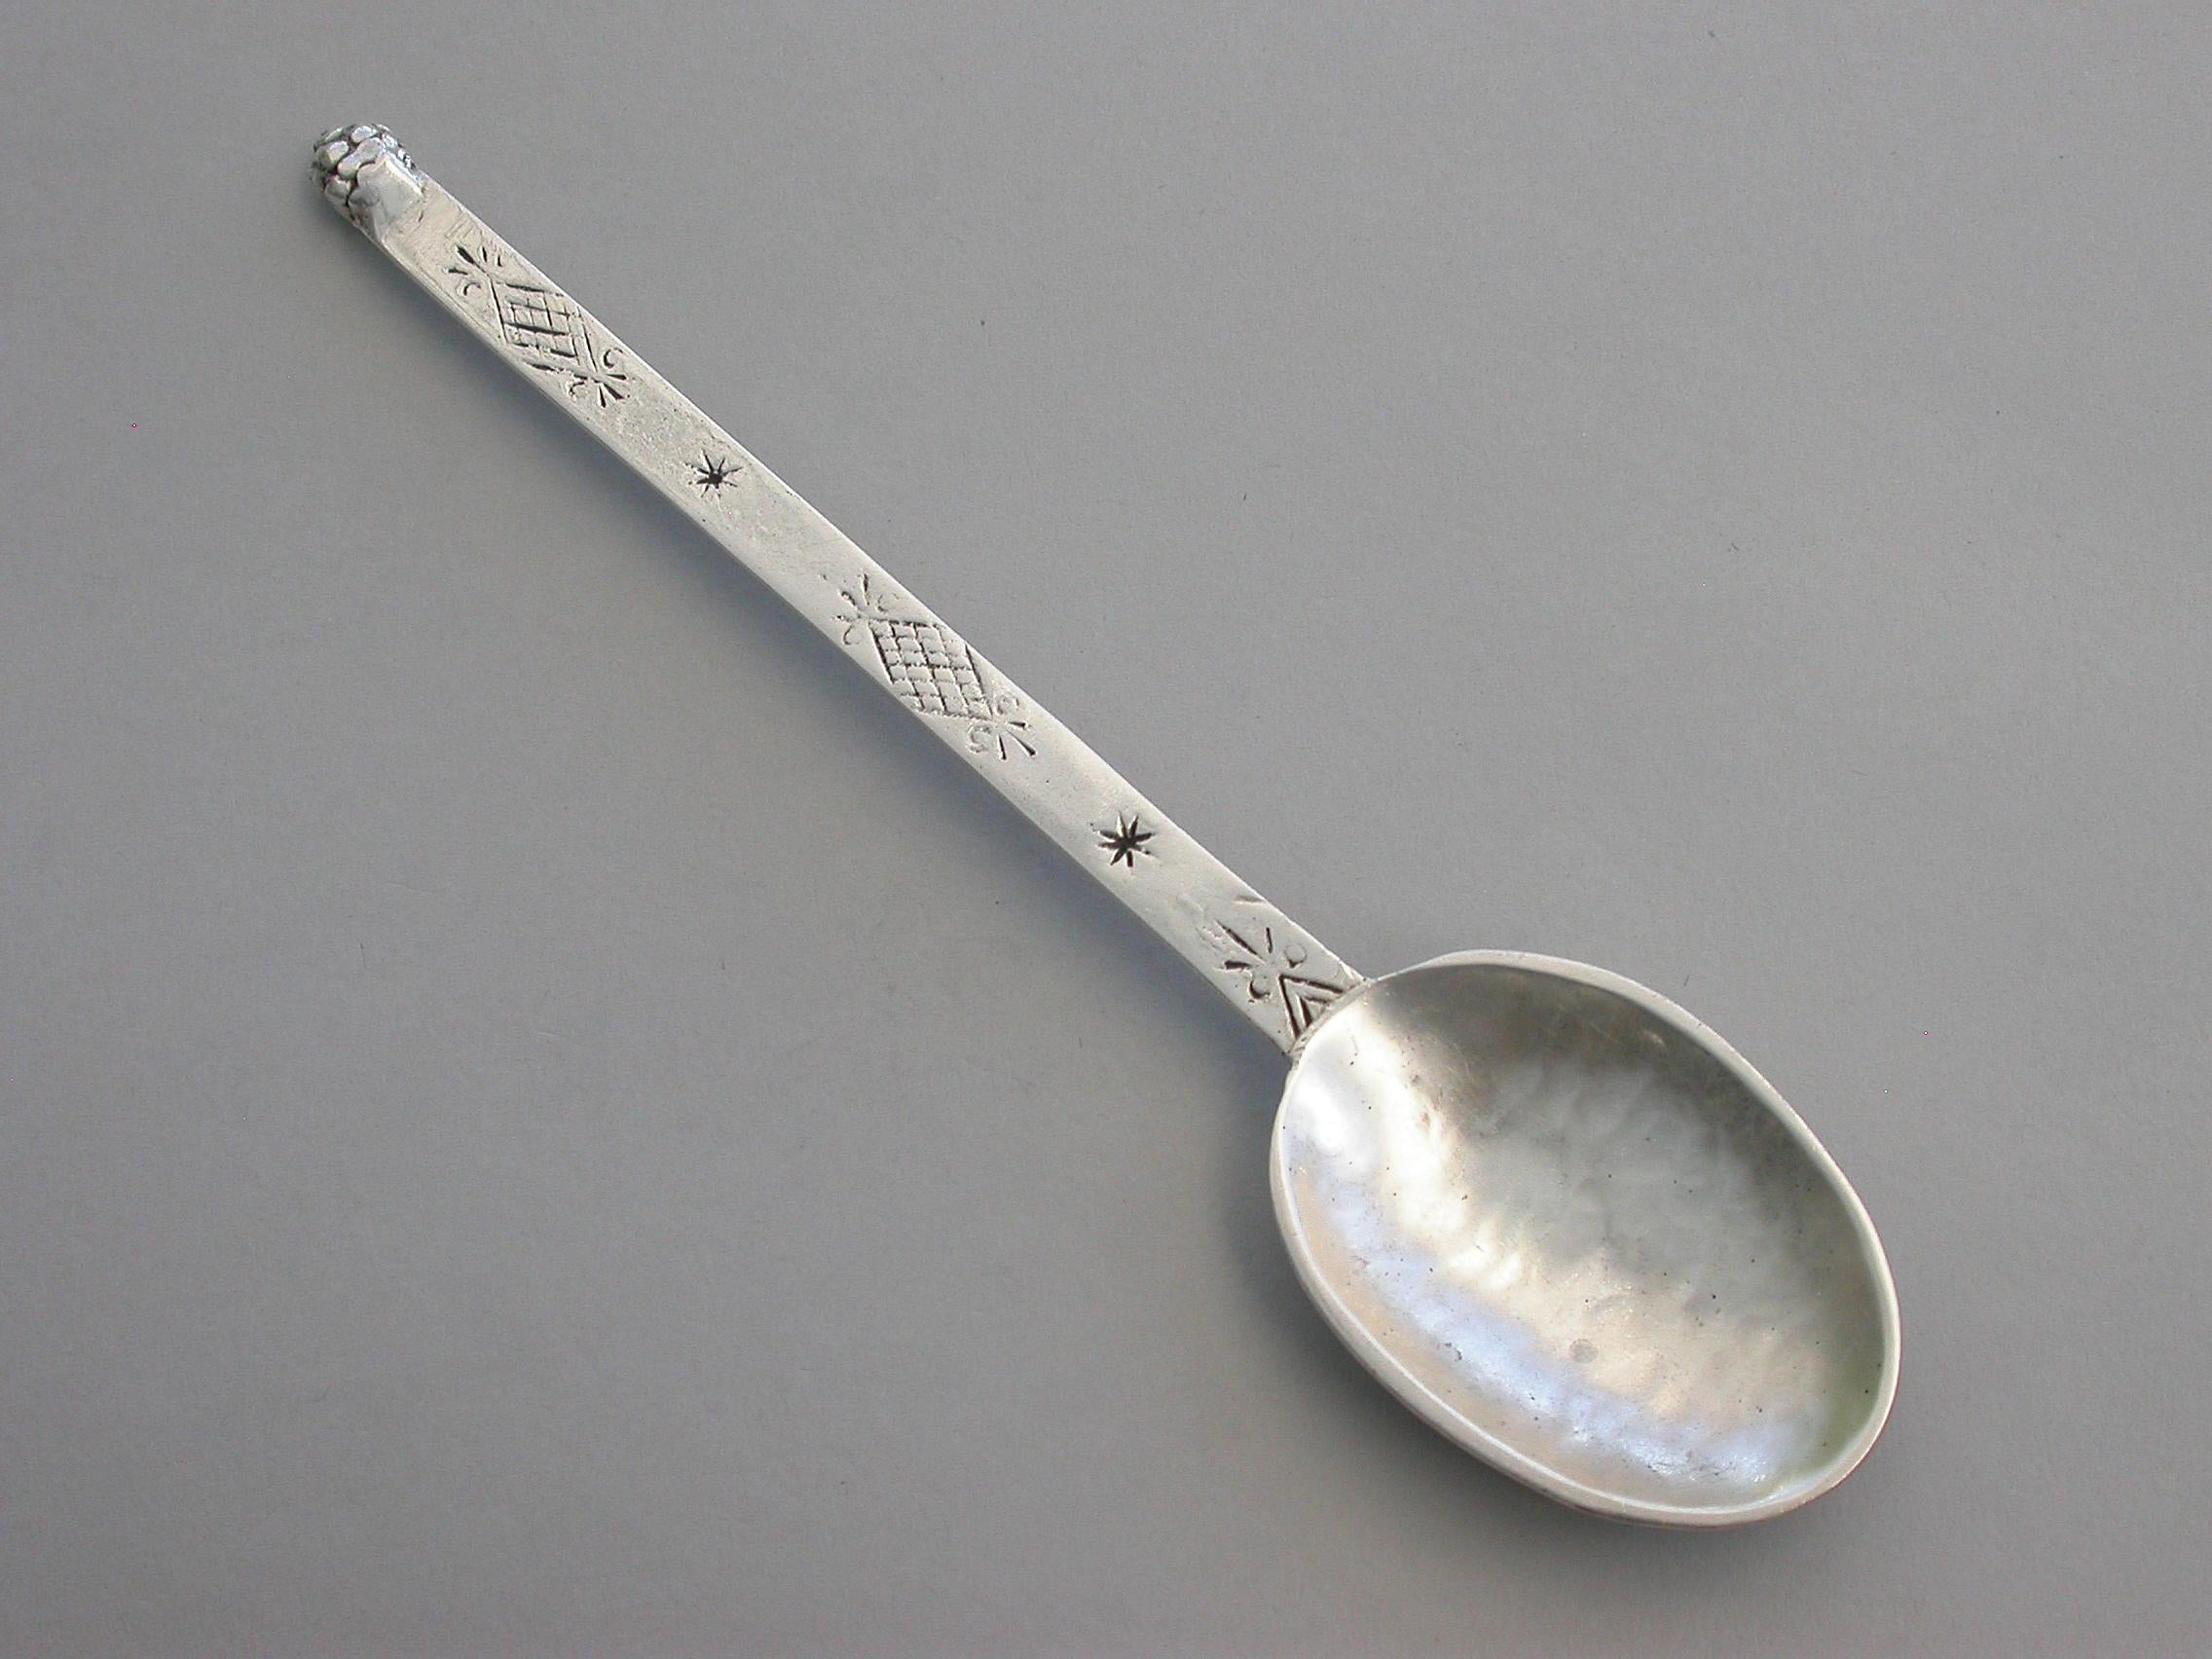 English Arts & Crafts Hammered Silver Spoon by Francis Harling, London, 1926